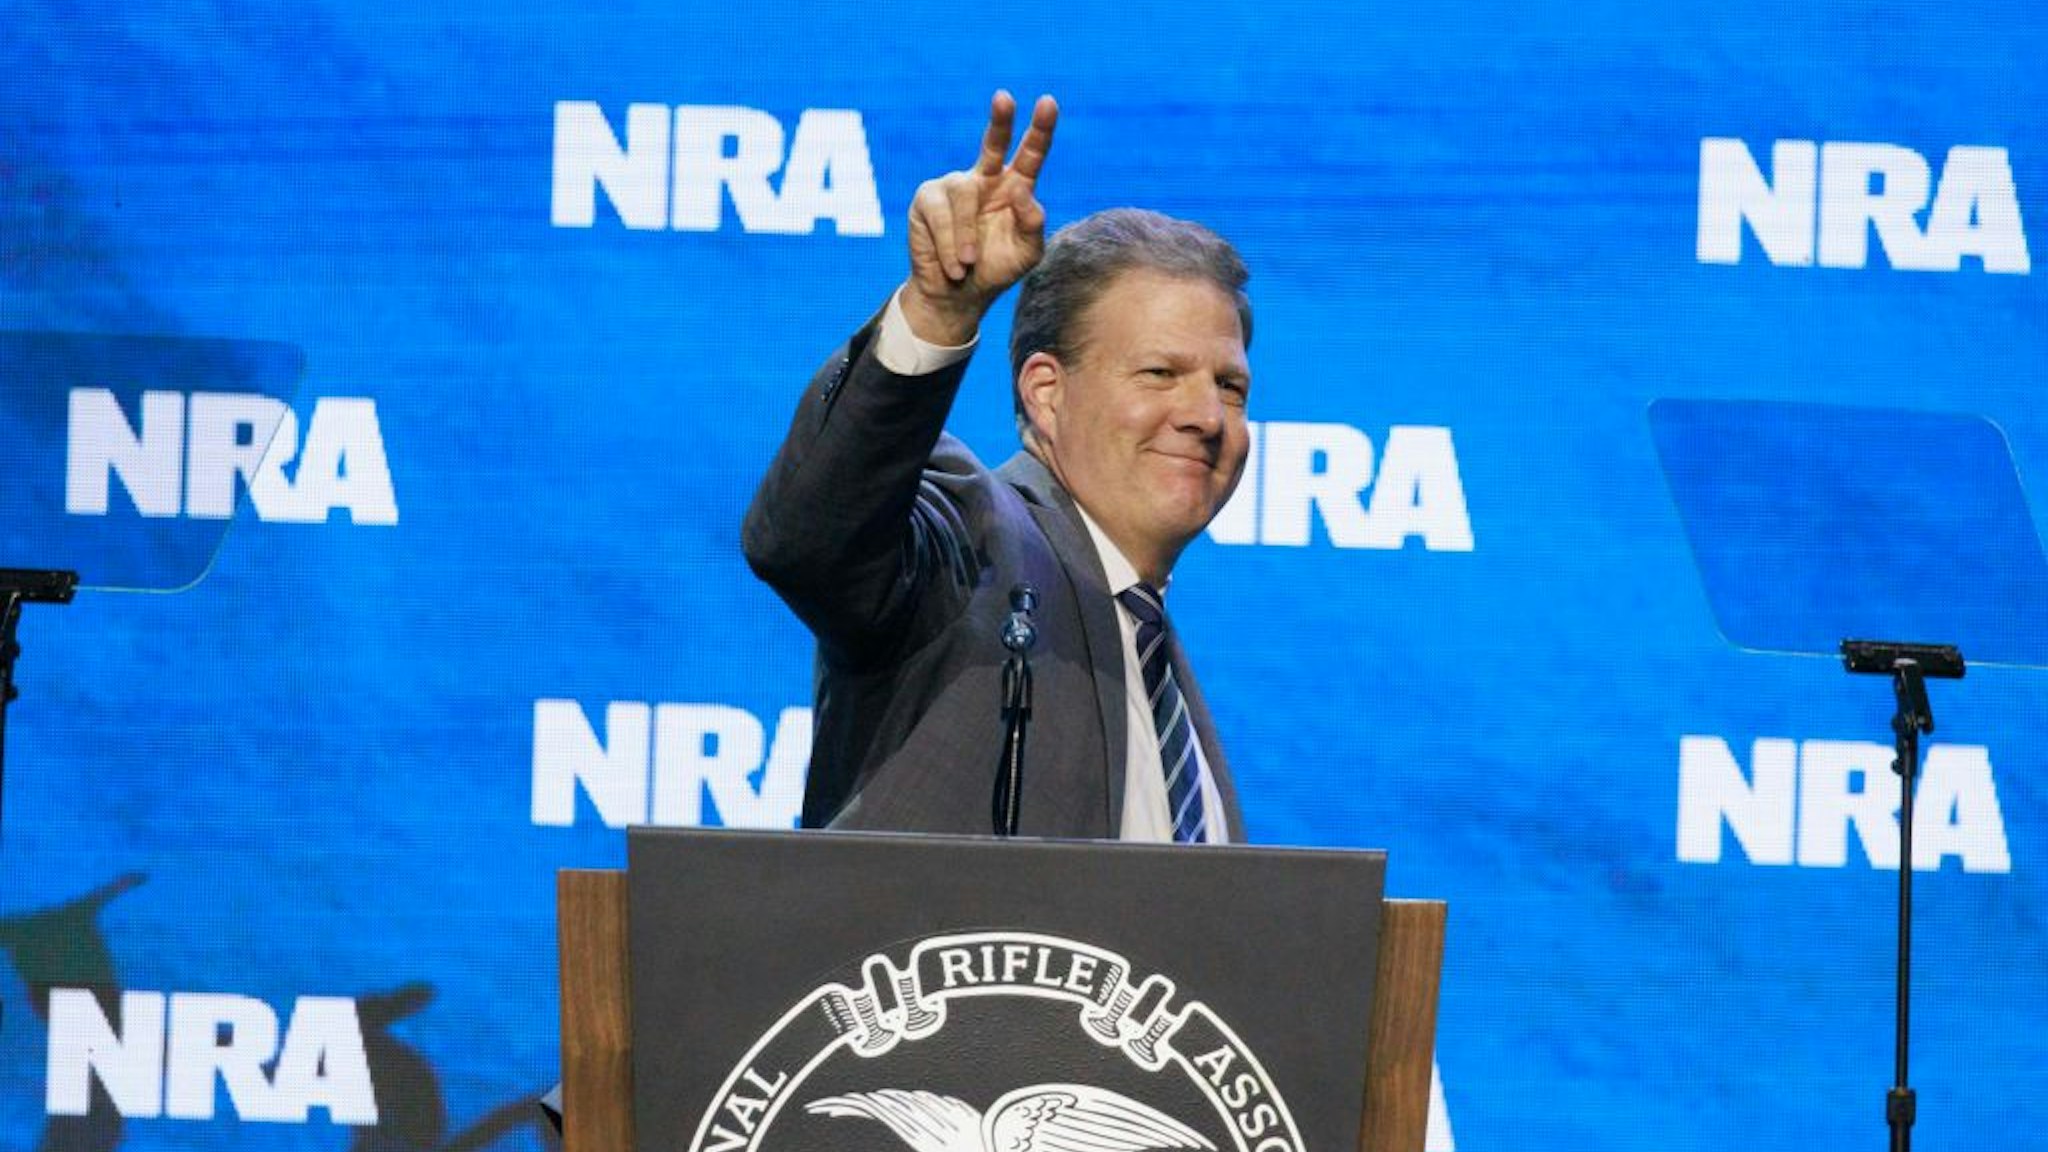 INDIANAPOLIS, INDIANA, UNITED STATES - 2023/04/14: New Hampshire Governor Chris Sununu speaks to guests at the 2023 NRA-ILA Leadership Forum in Indianapolis. The forum is part of the National Rifle Association's Annual Meetings &amp; Exhibits which is expected to draw around 70,000 guests, opens today and runs through Sunday.